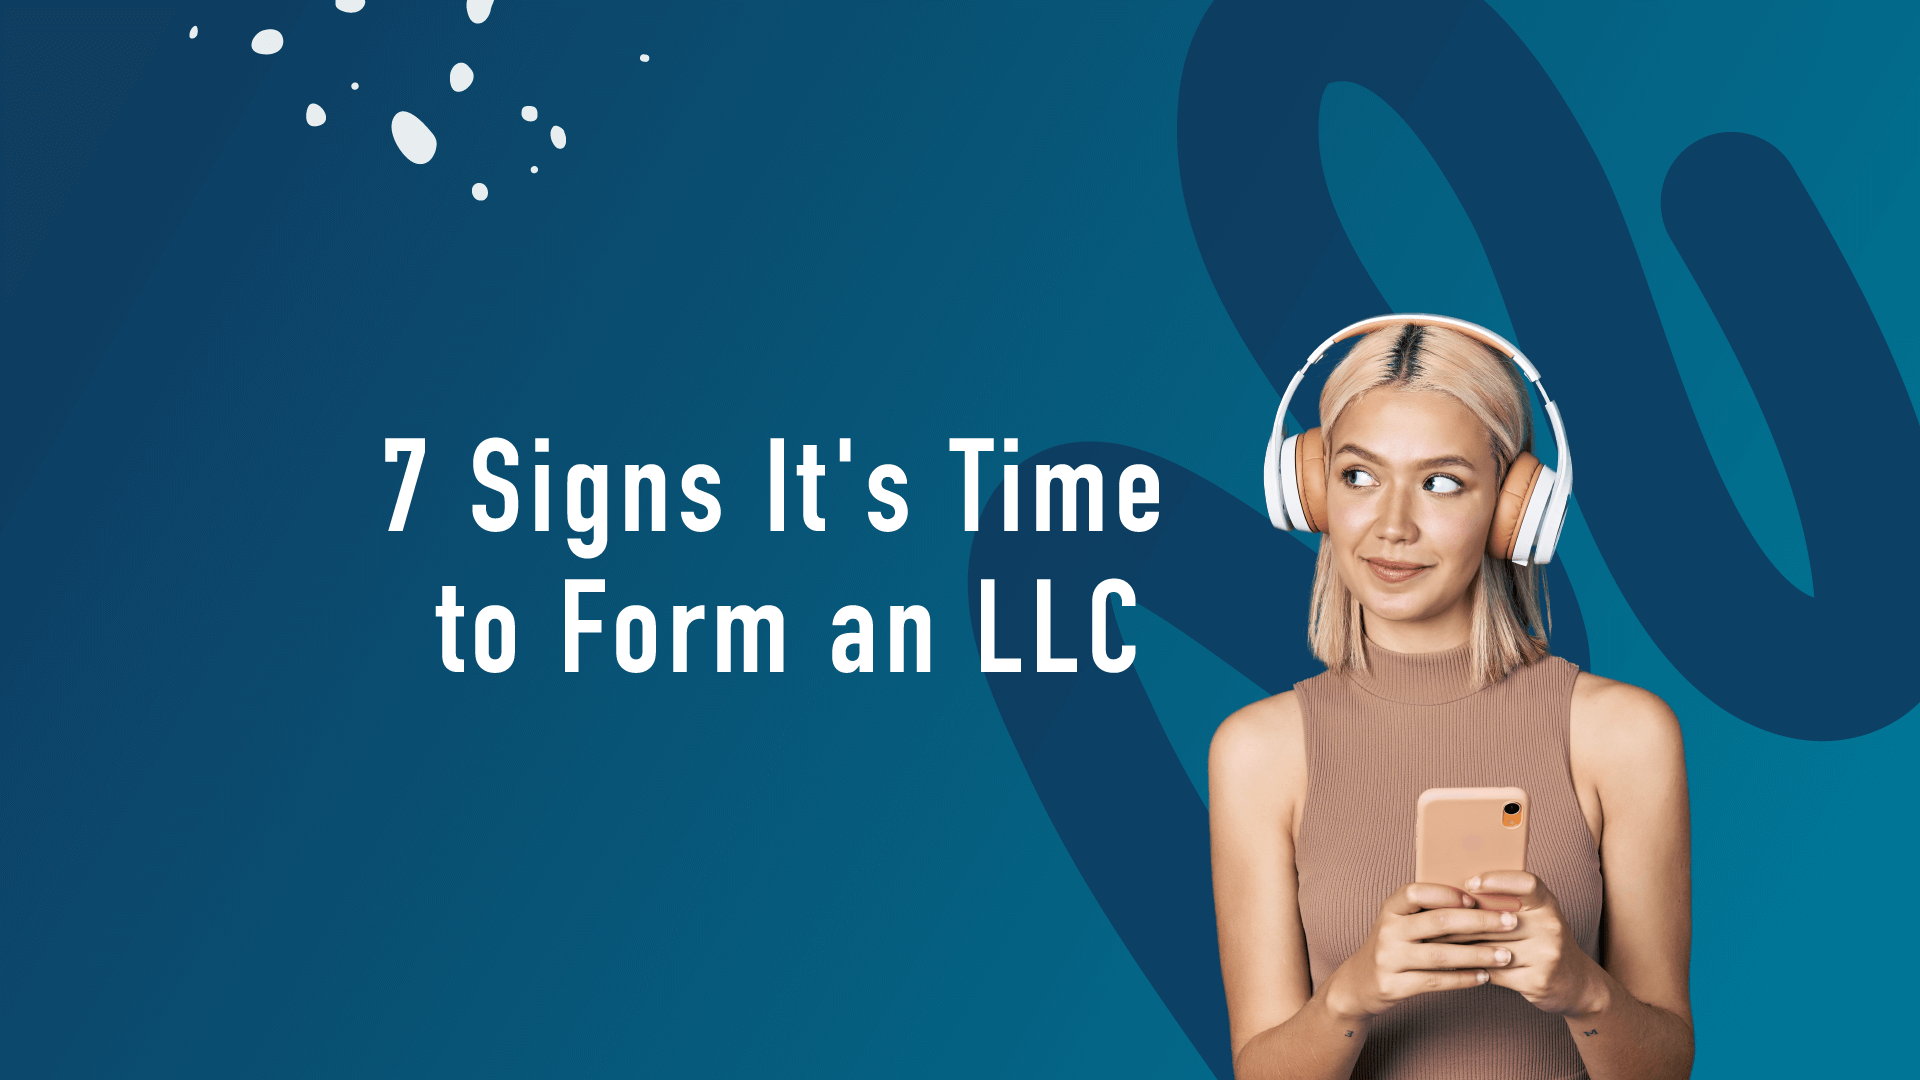 7 Signs It's Time to Form an LLC